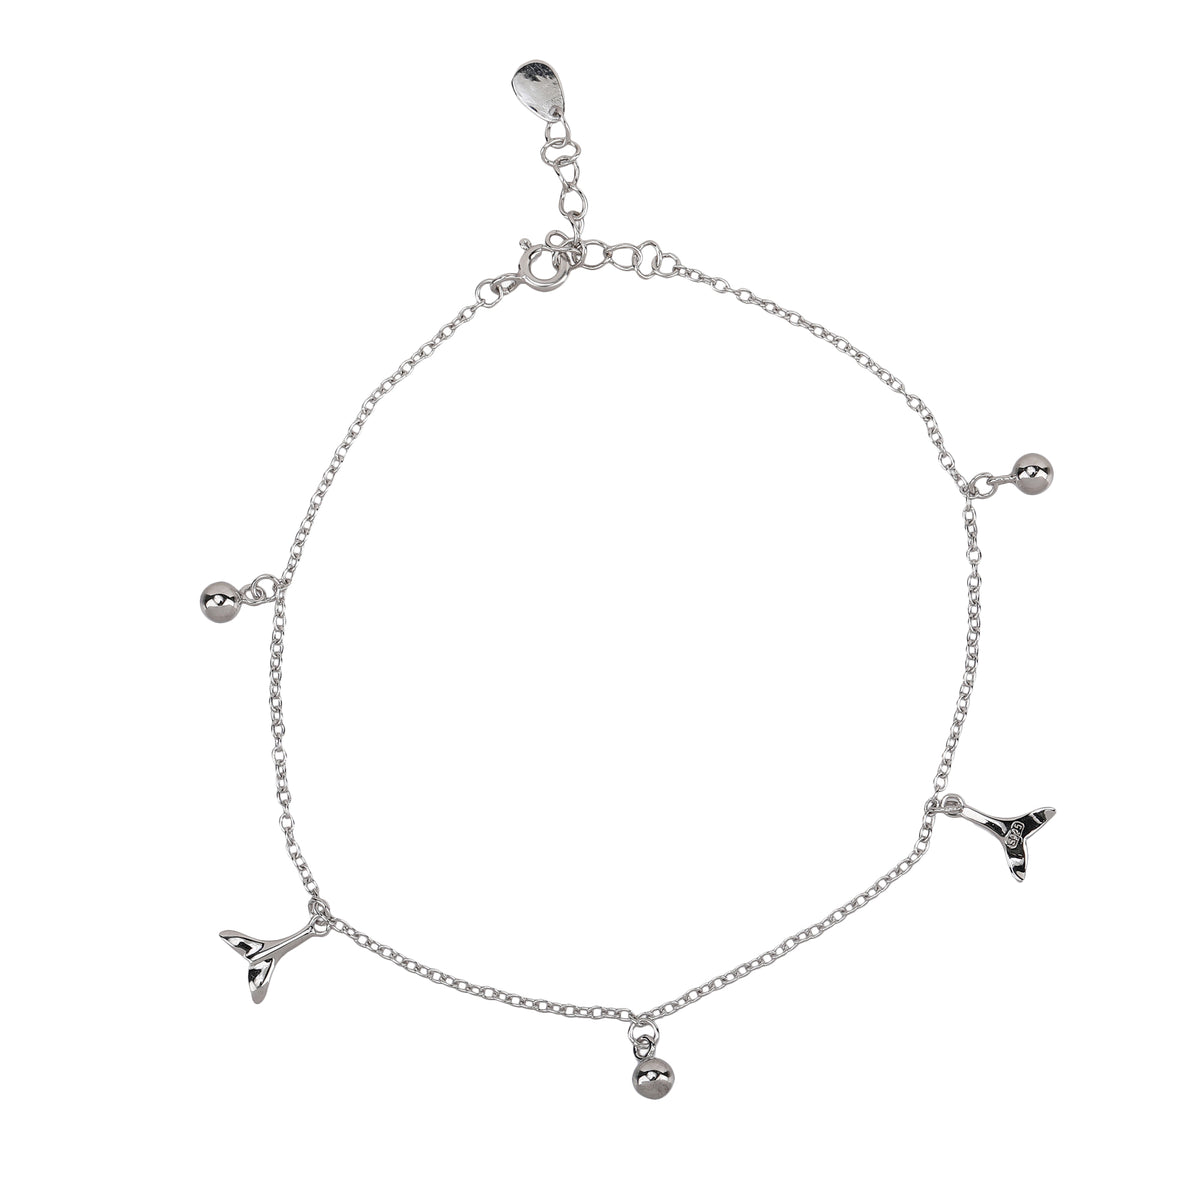 Silver fish tail anklet